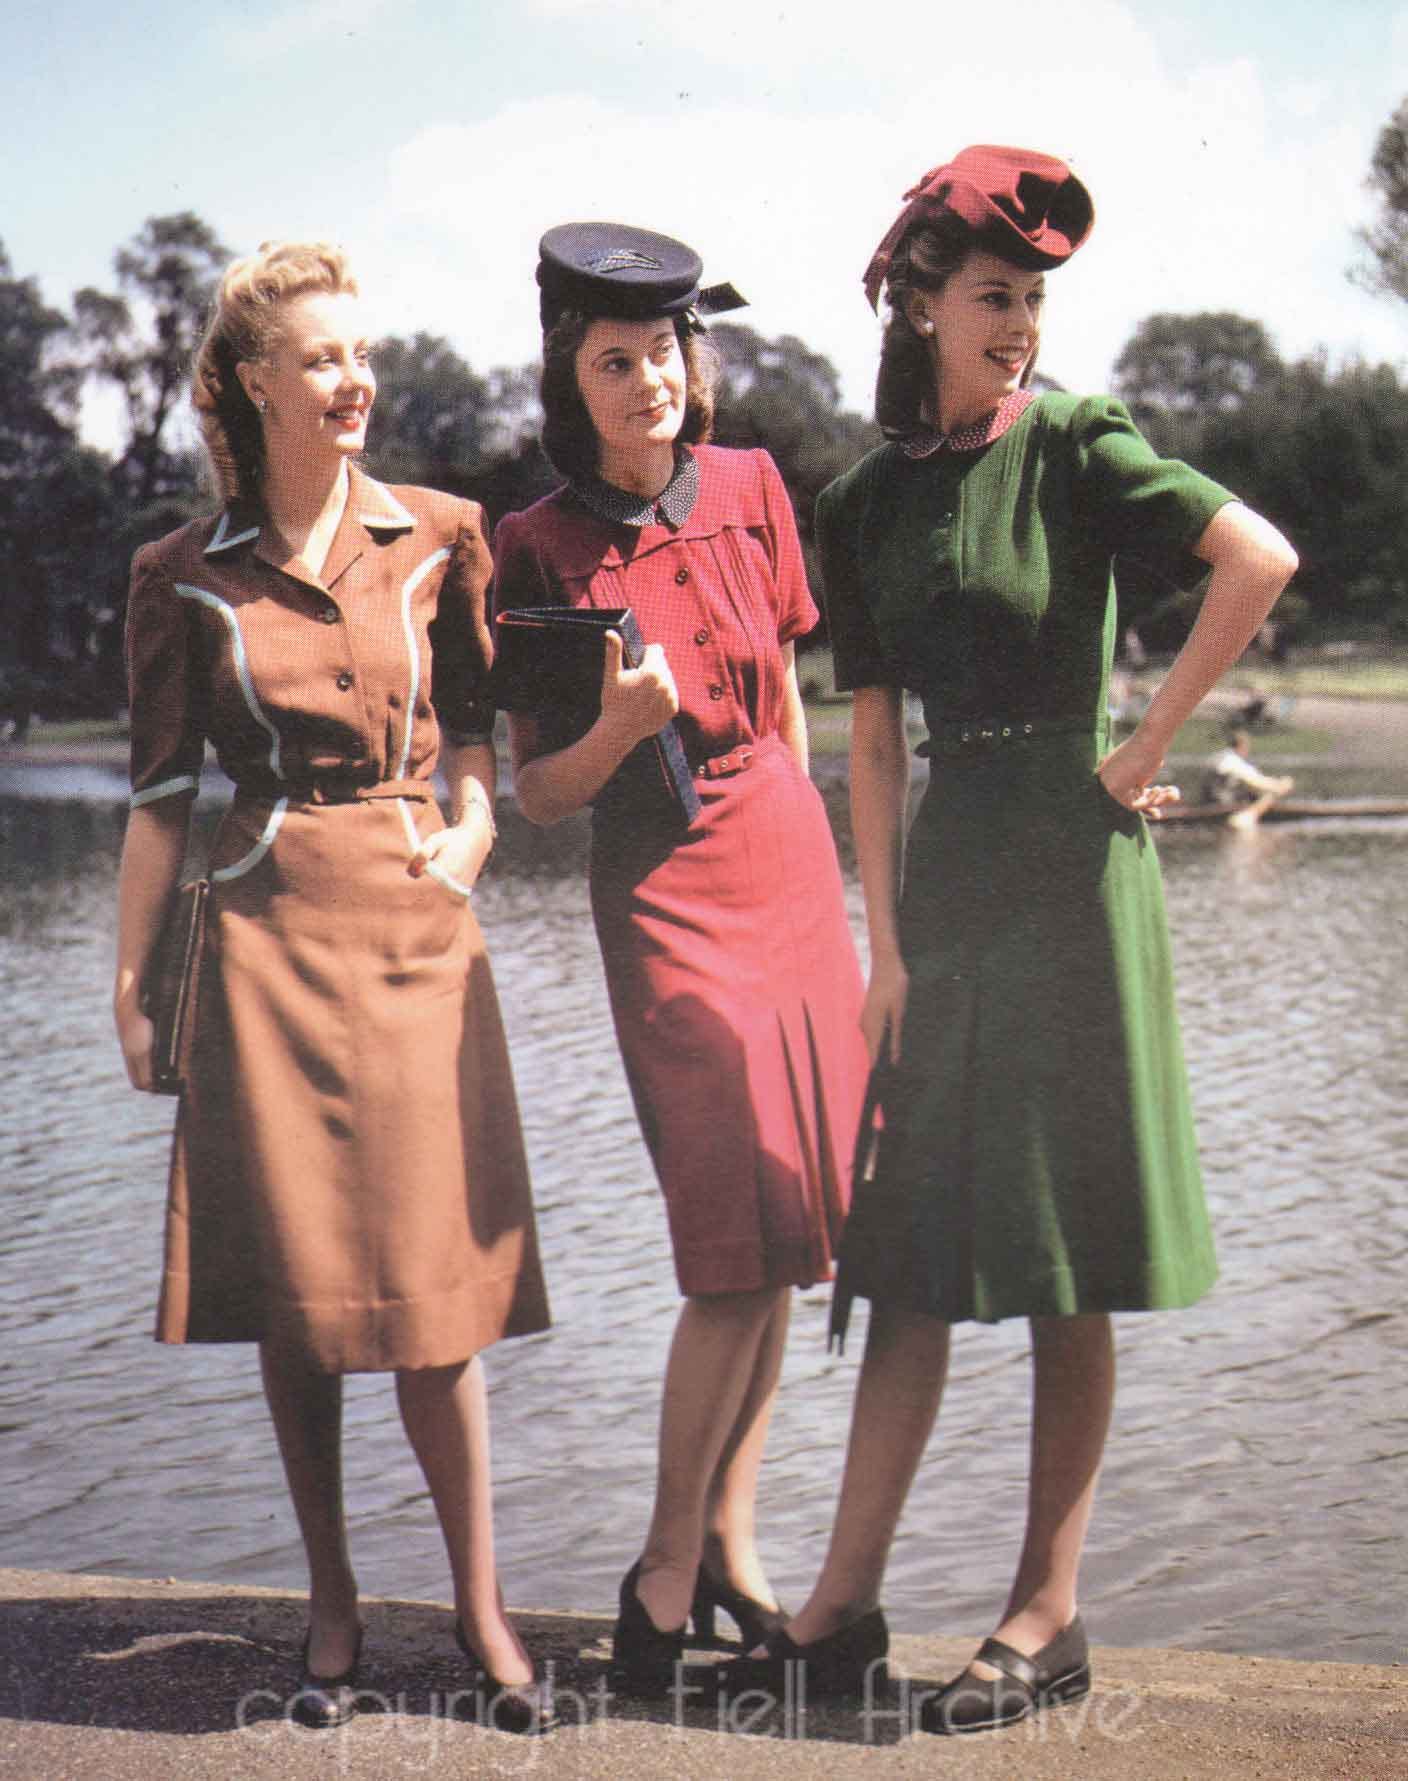 1940 style clothes